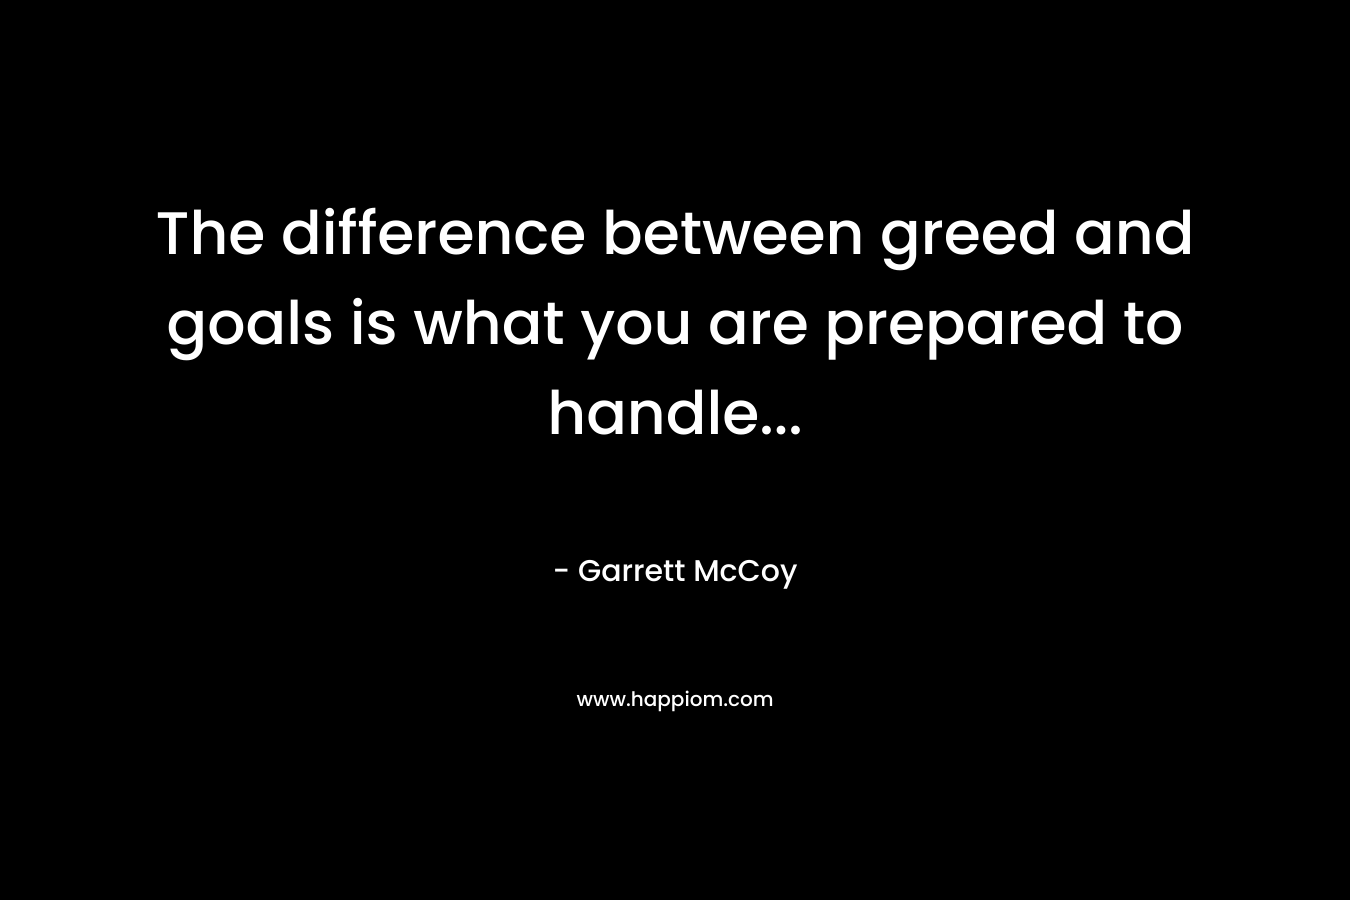 The difference between greed and goals is what you are prepared to handle...